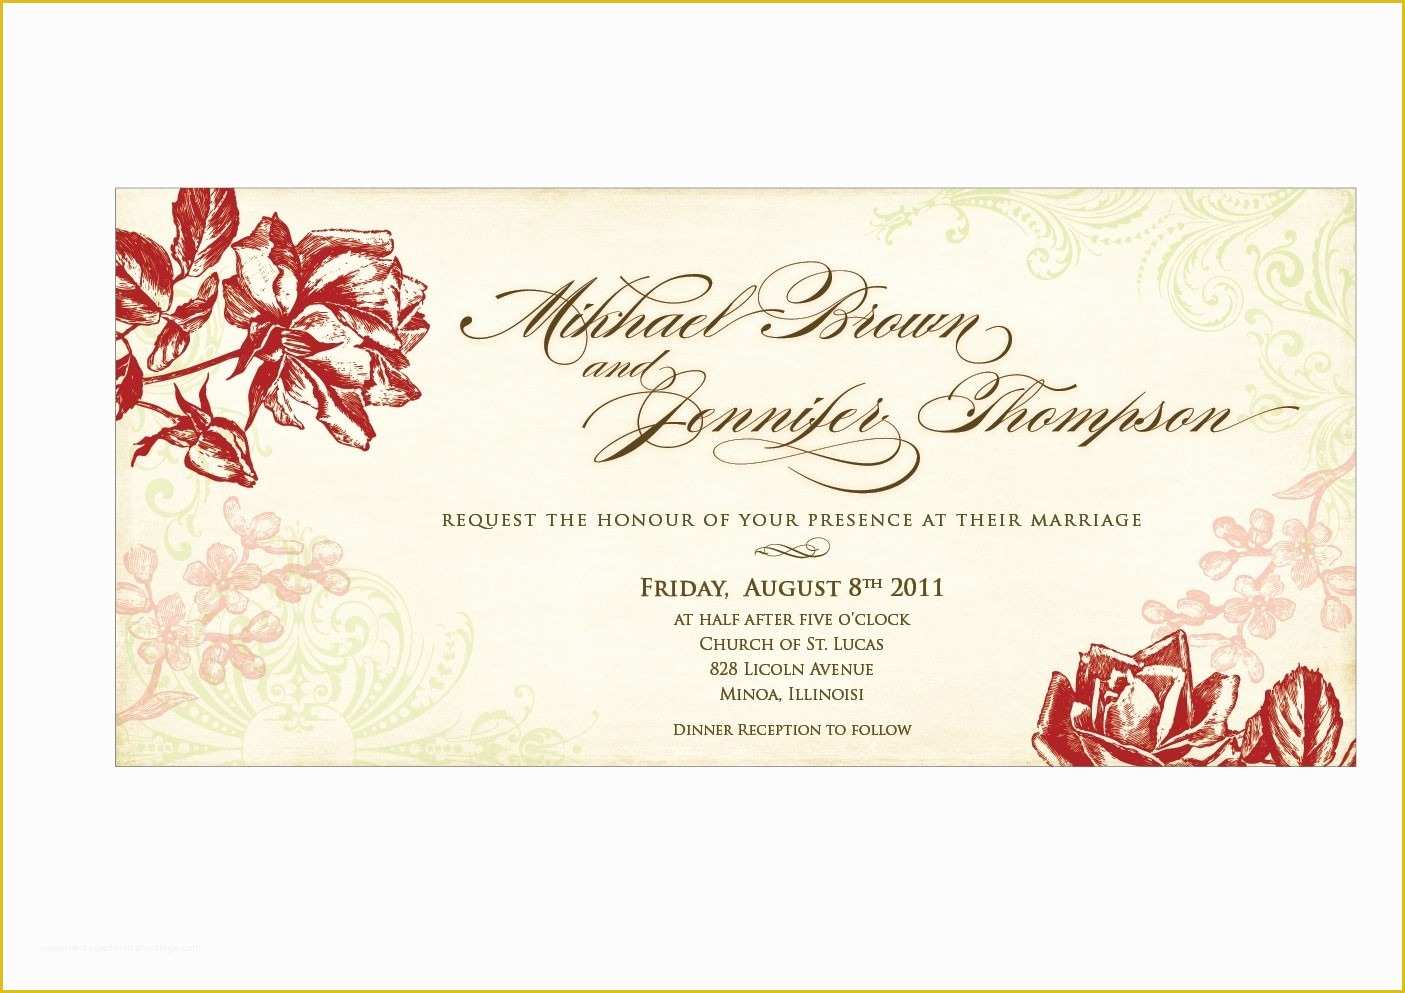 Wedding Card Design Template Free Download Of Wedding Cards Design Samples Yelomphone Pany